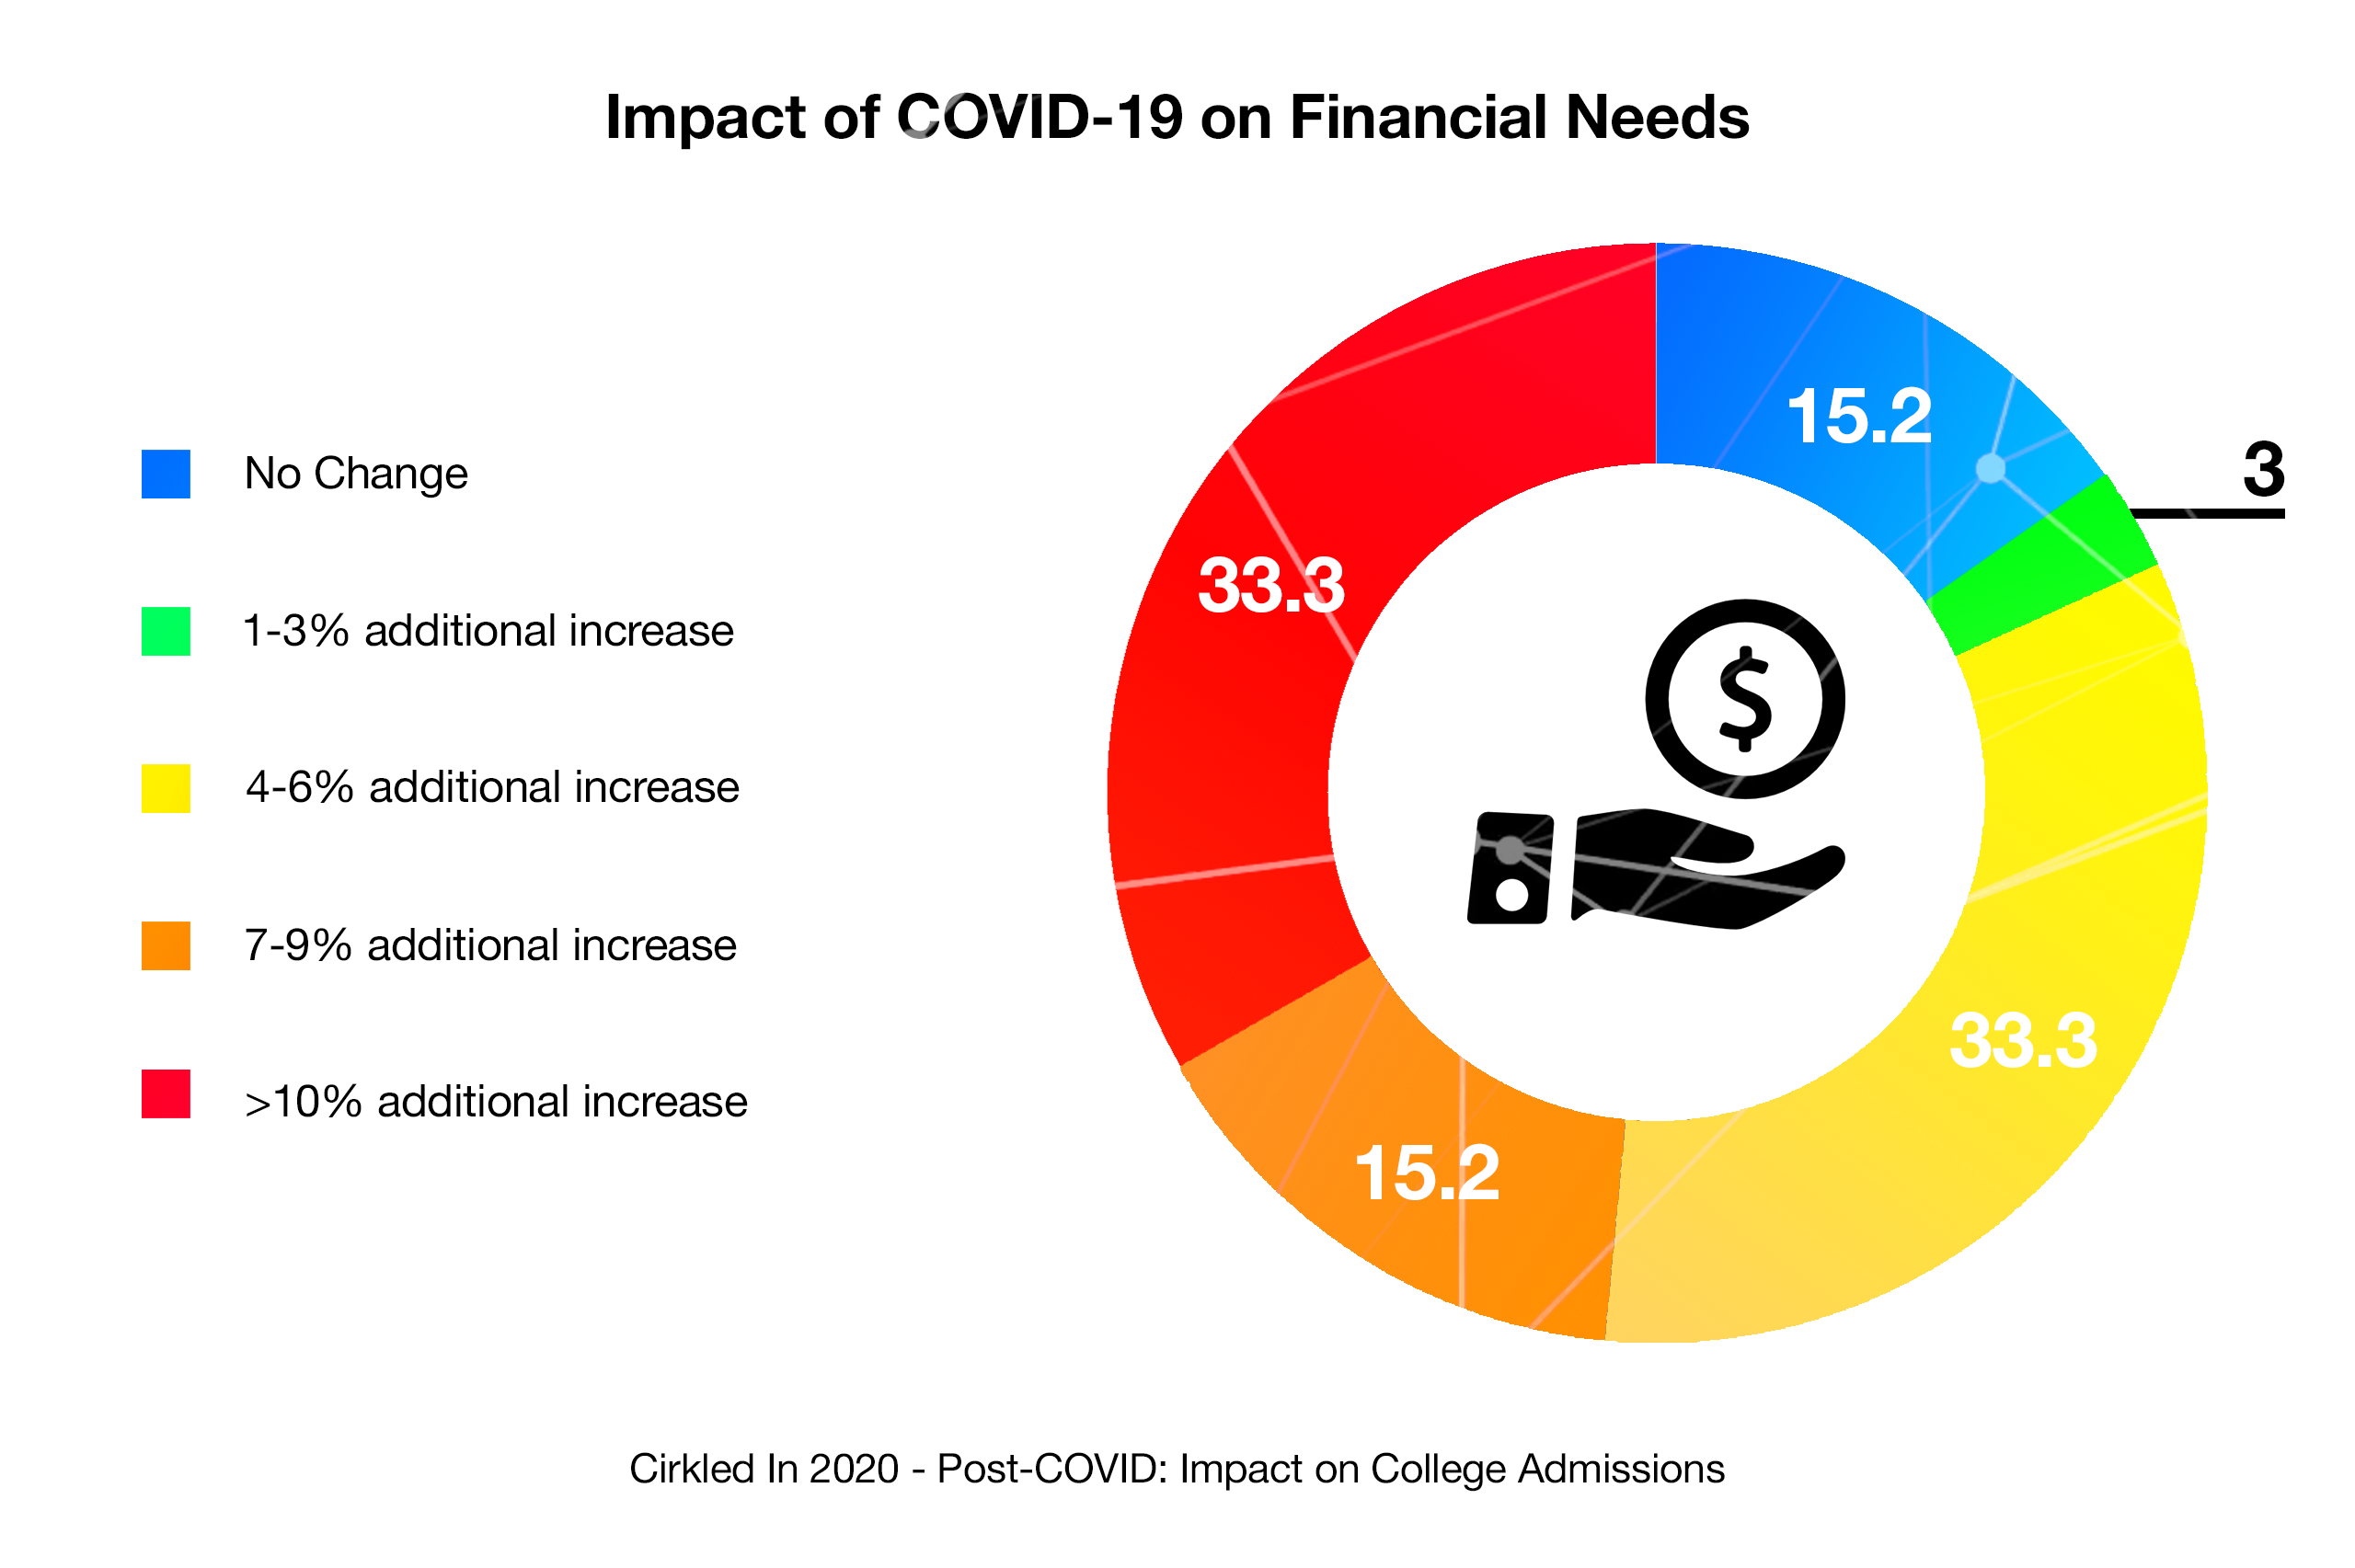 COVID-19: Impact on Financial Needs